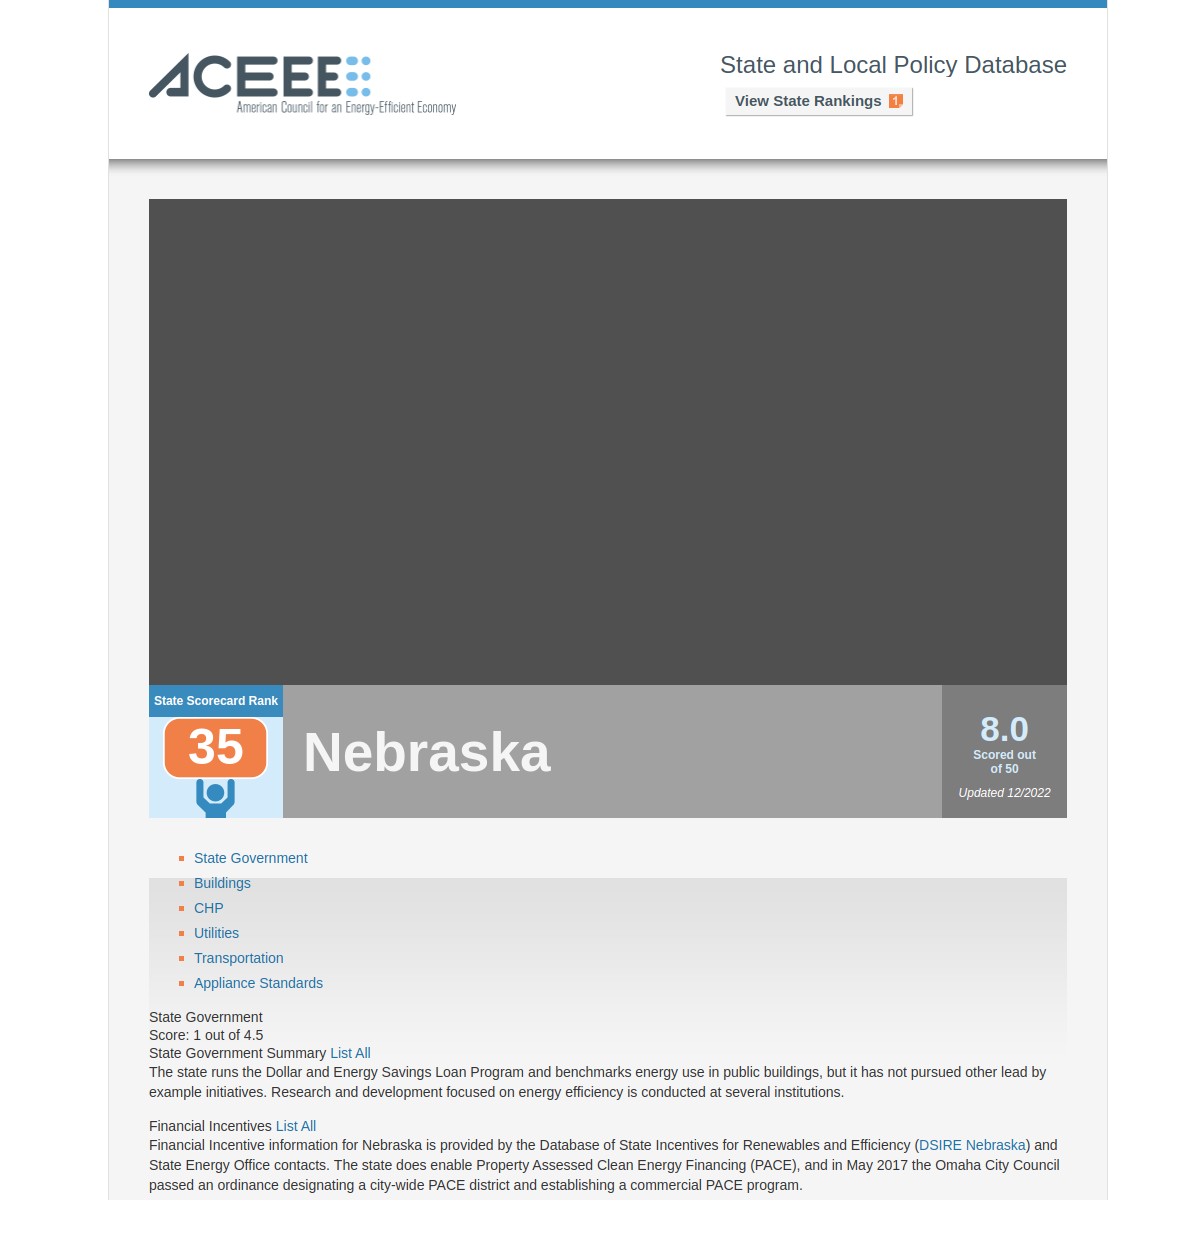 The American Council for an Energy-Efficient Economy (ACEEE)